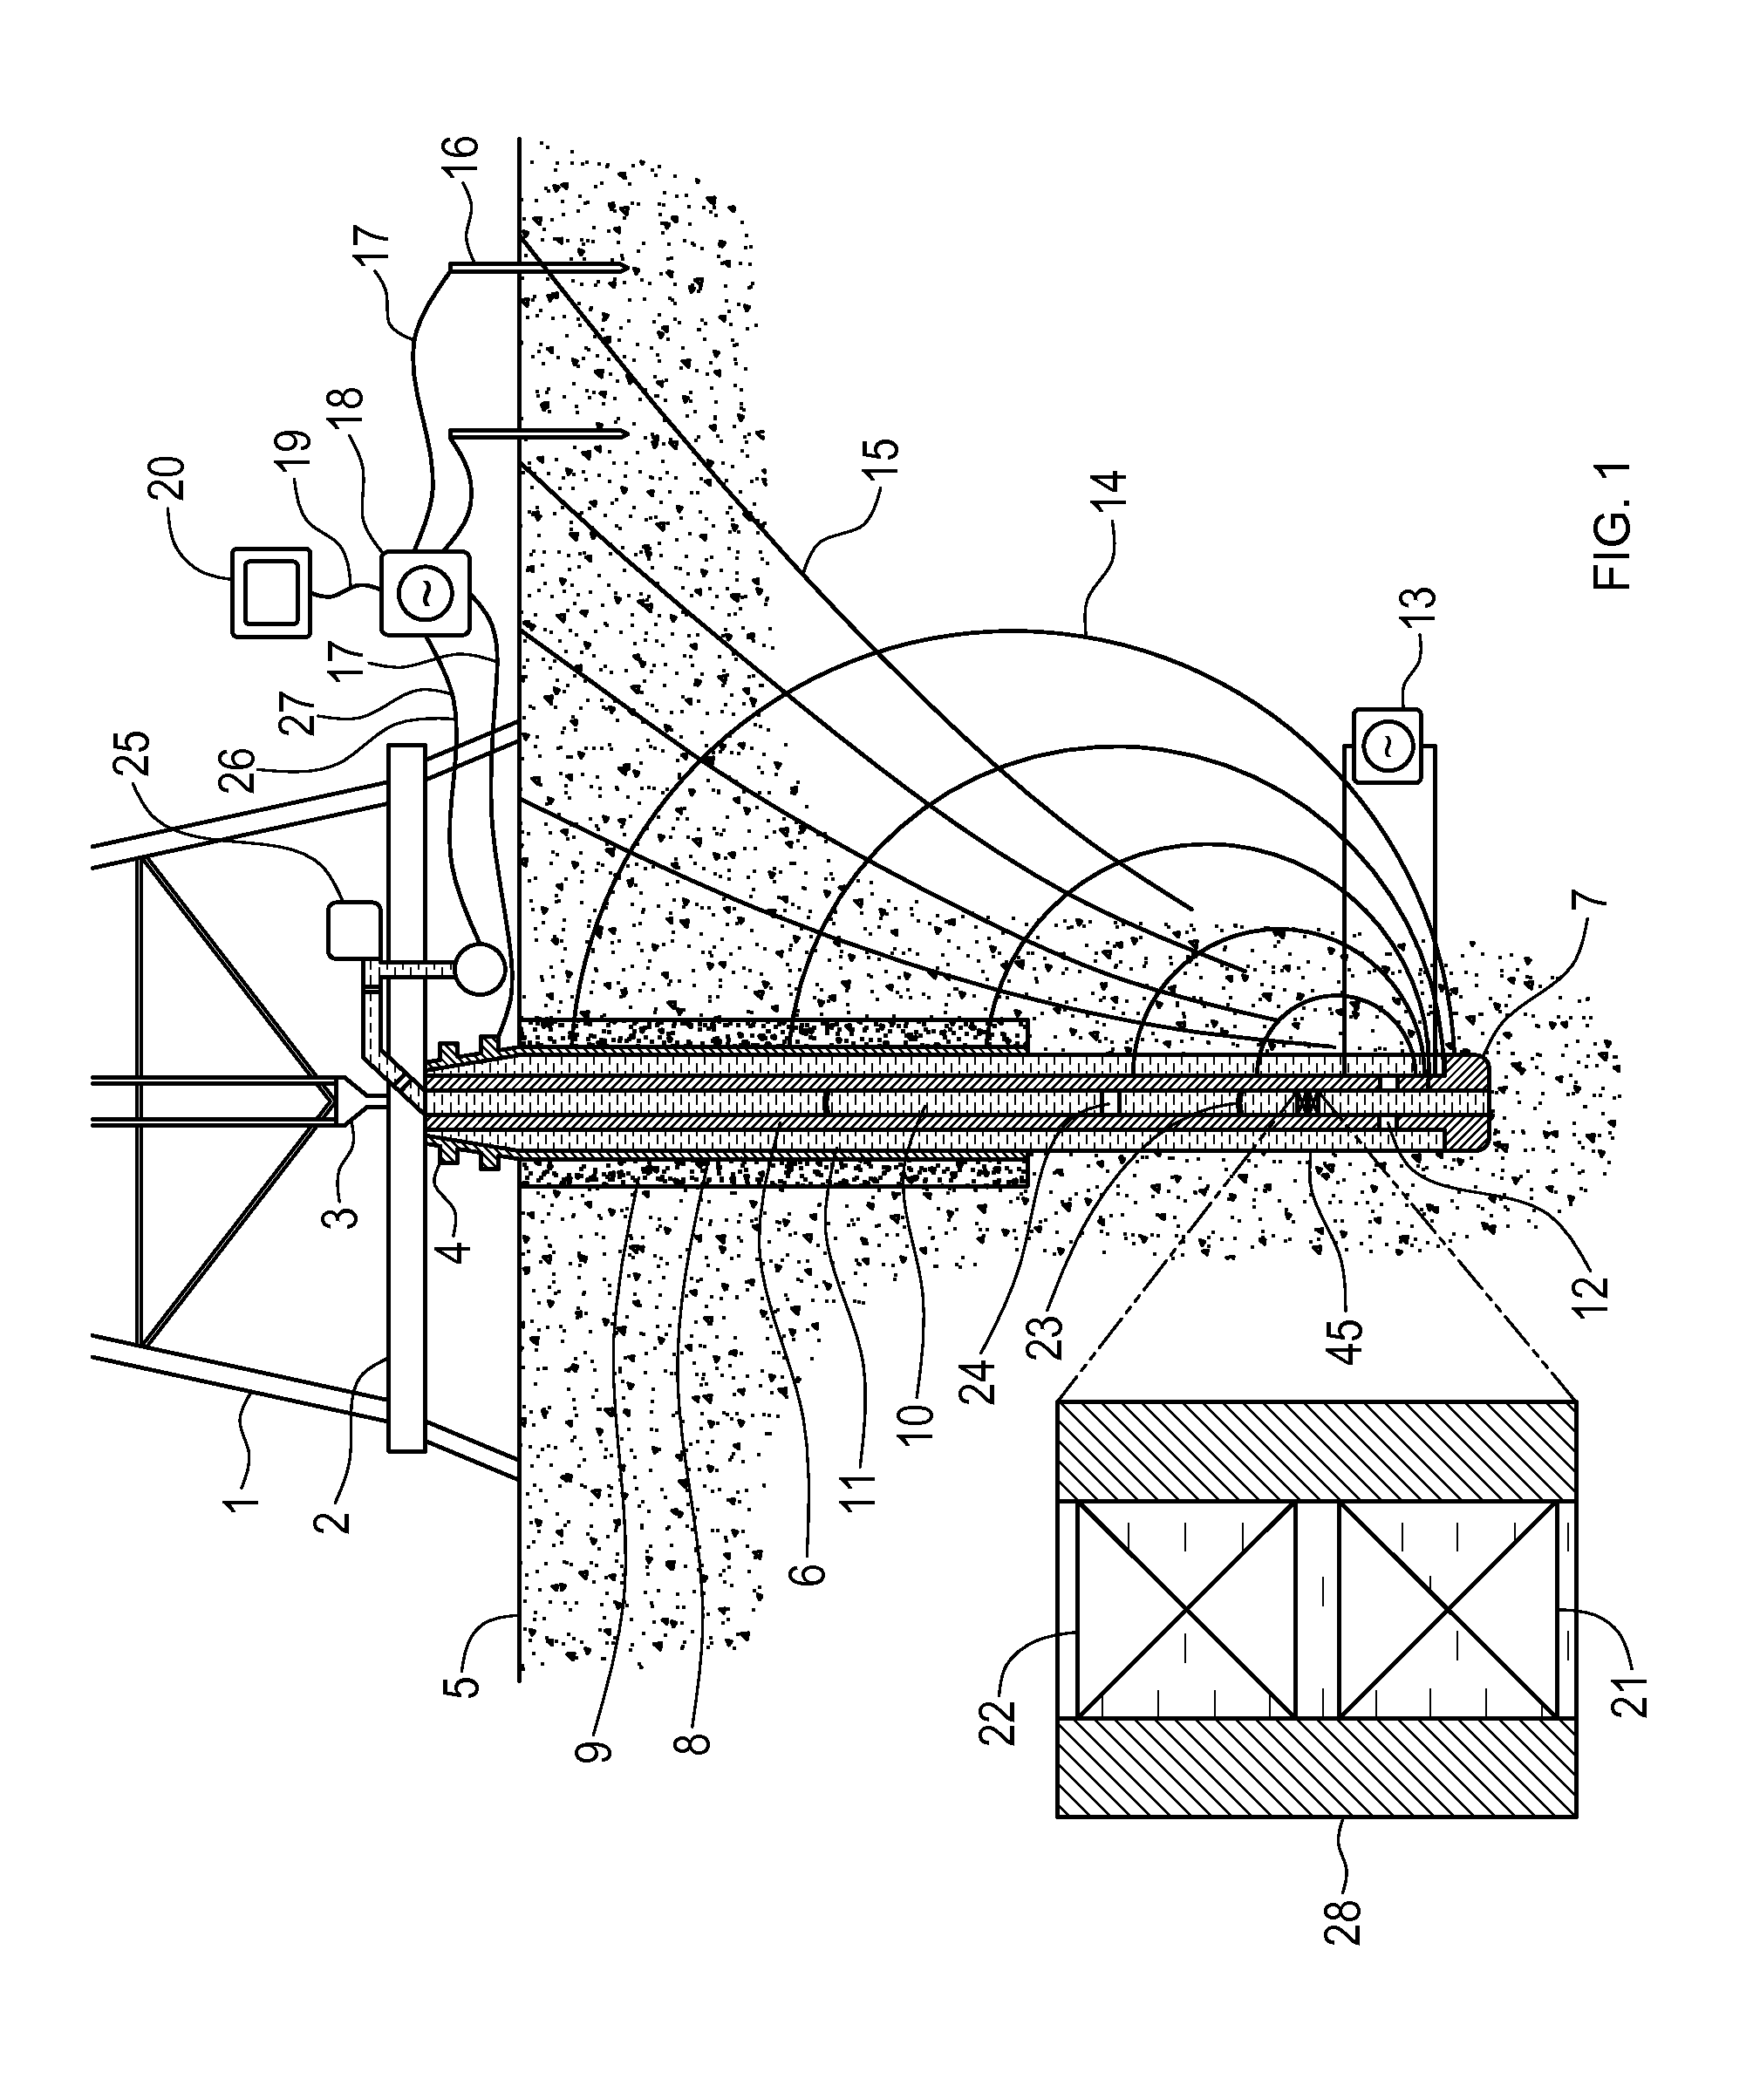 Downhole electromagnetic and mud pulse telemetry apparatus